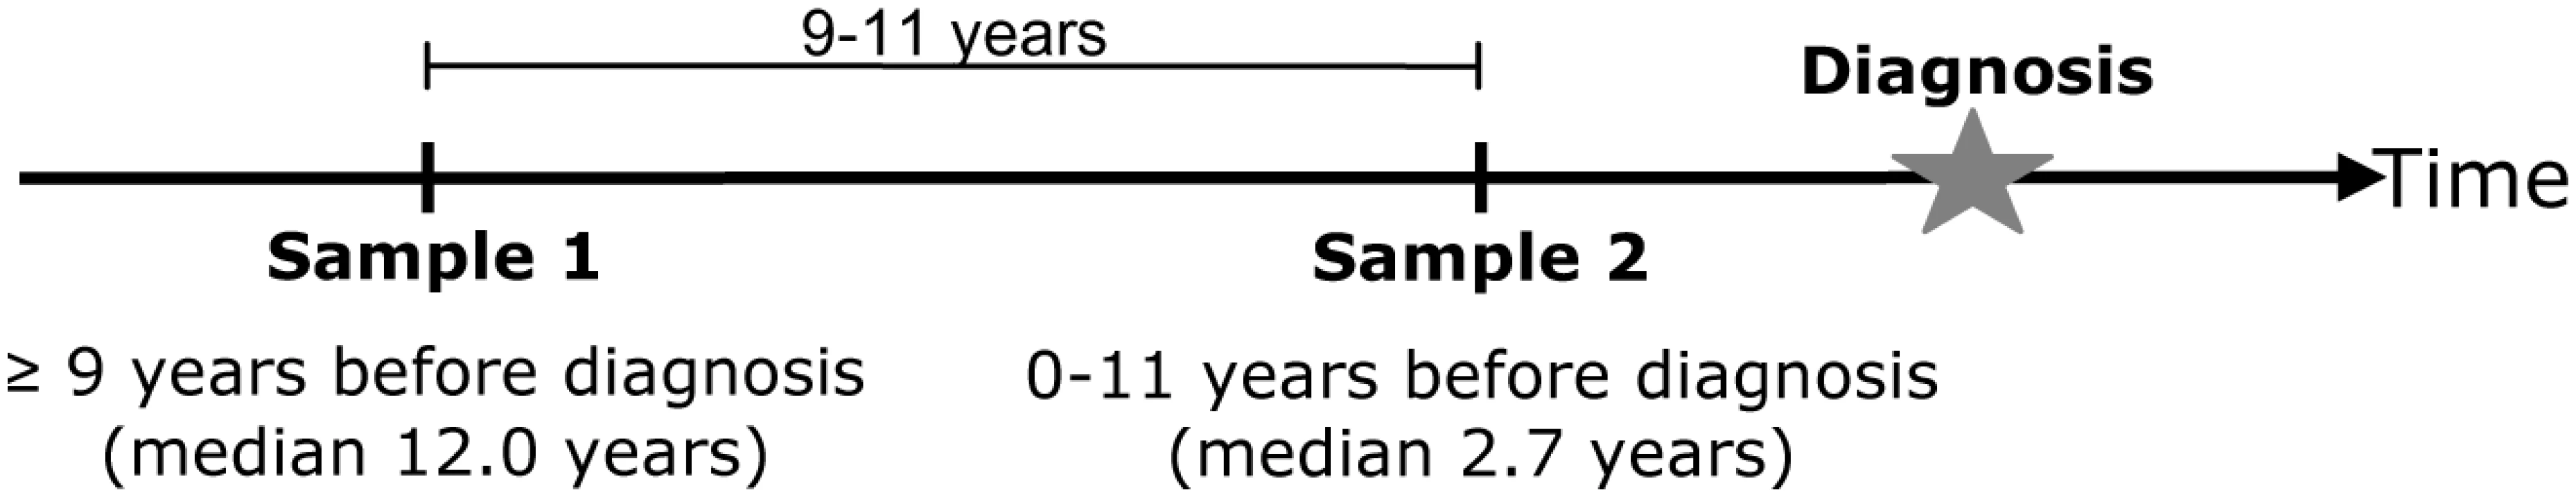 Schematic drawing of blood draws for sample 1 (baseline) and sample 2 (follow up).